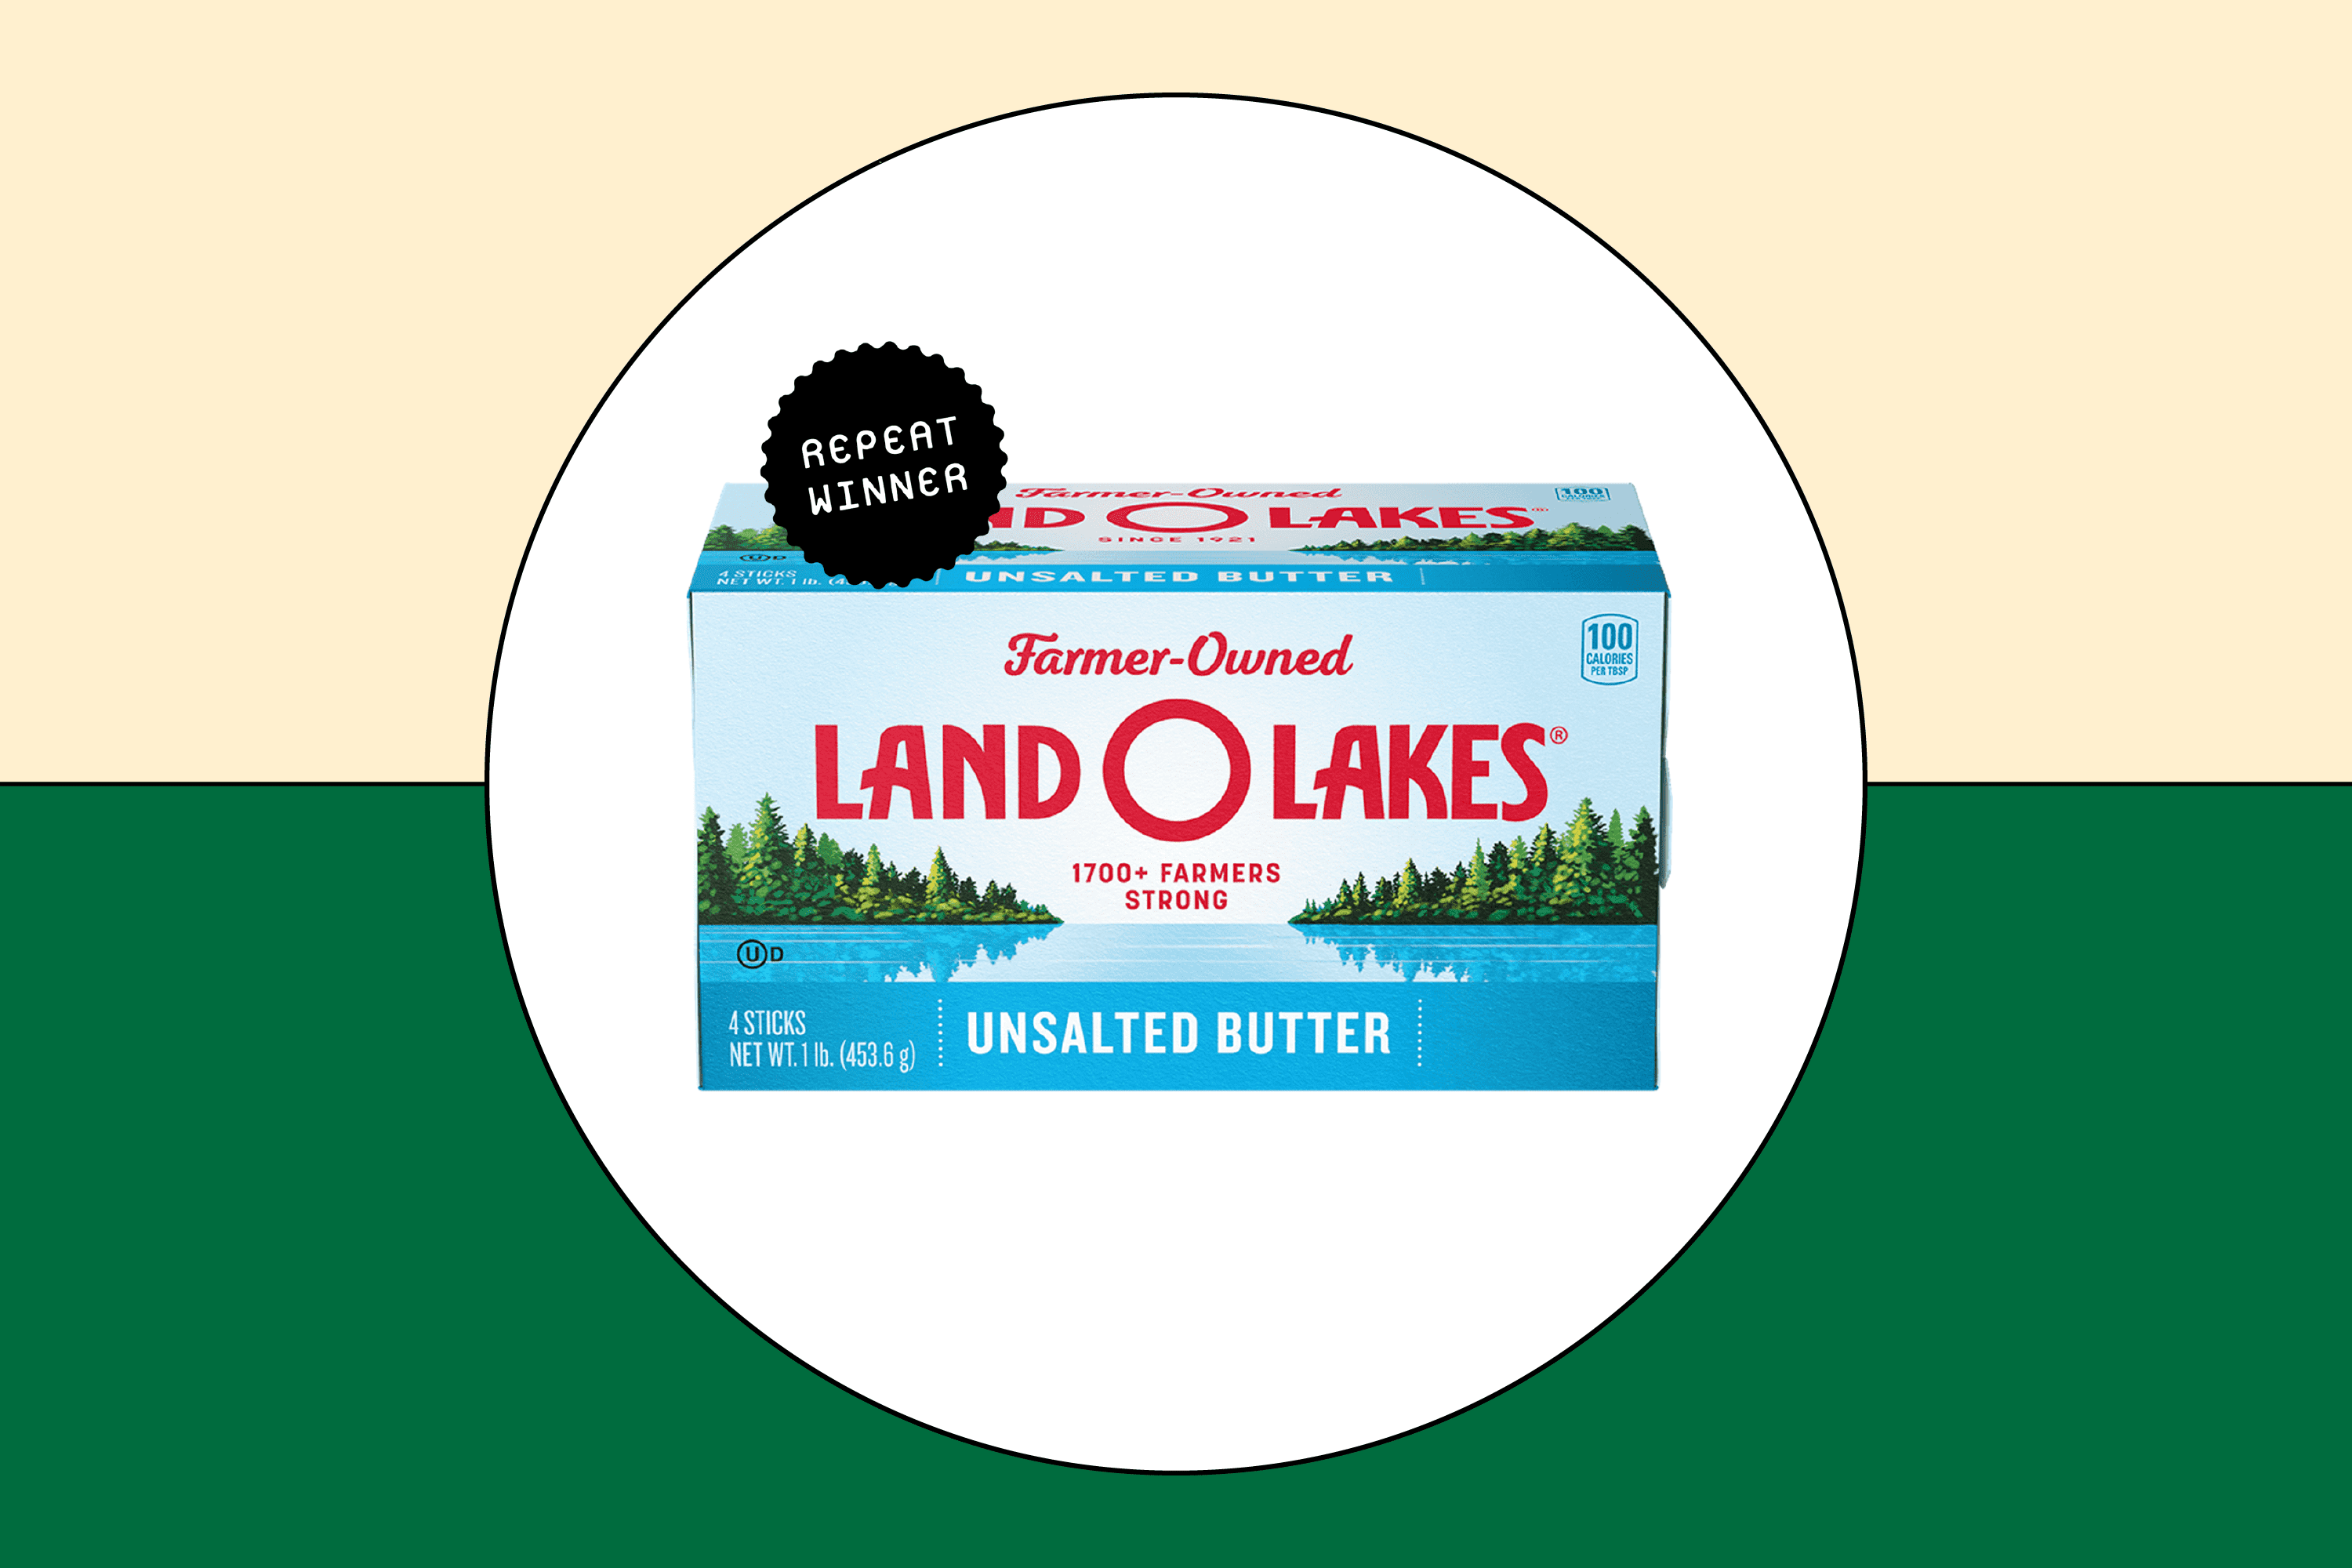 Land O Lakes® Extra Creamy Unsalted Butter Sticks, 1 lb - Foods Co.